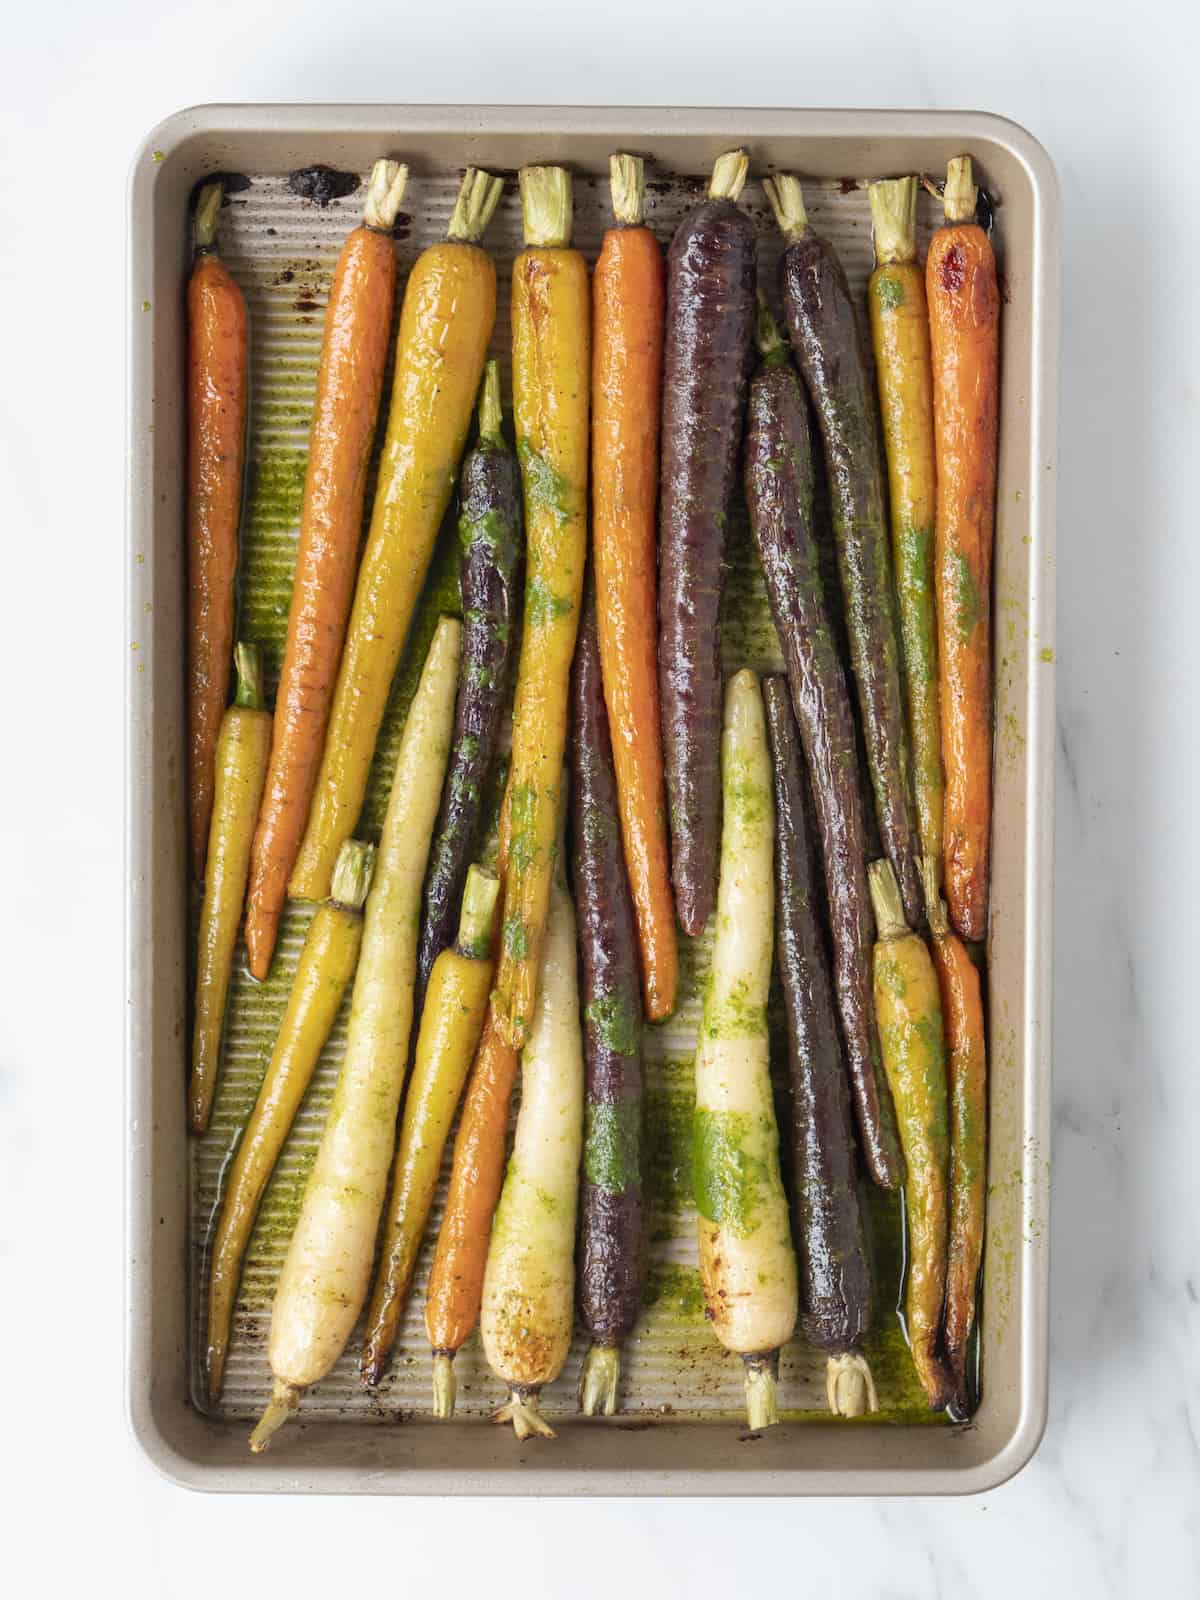 A sheet pan with roasted heirloom carrots drizzled with vinaigrette.